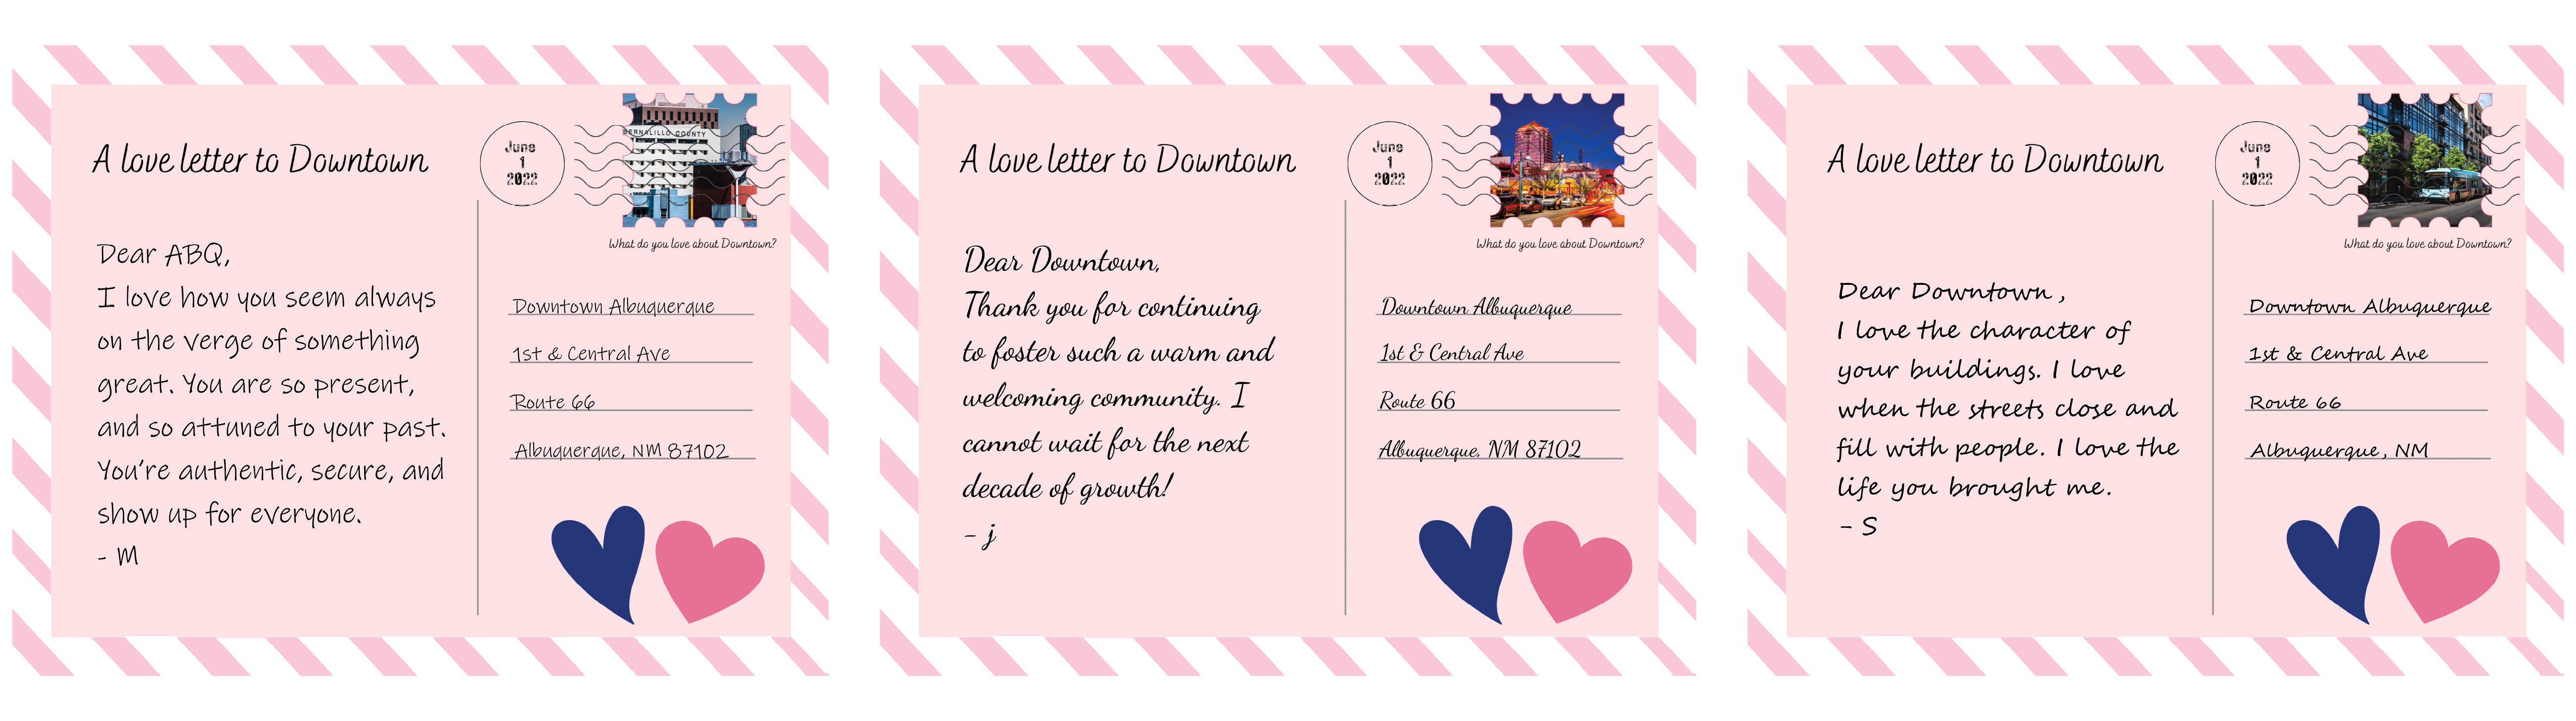 Love letters x3.png